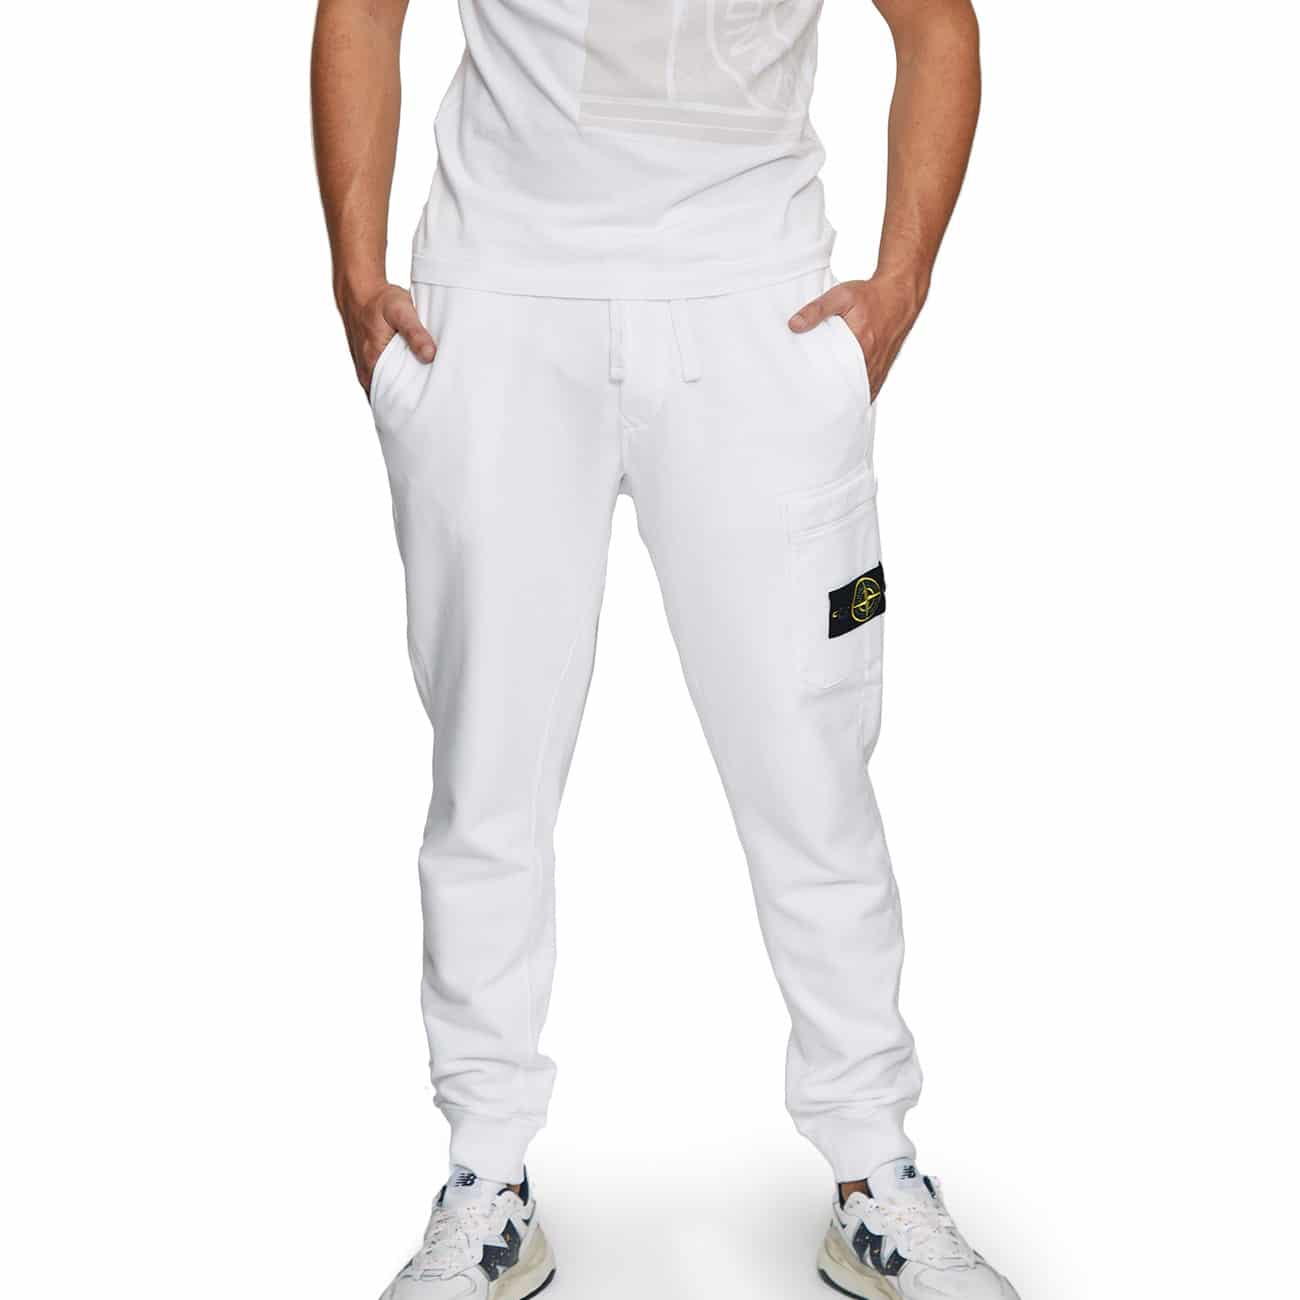 STONE ISLAND FLEECE PANTS TROUSERS WITH PATCH - WHITE - London ...